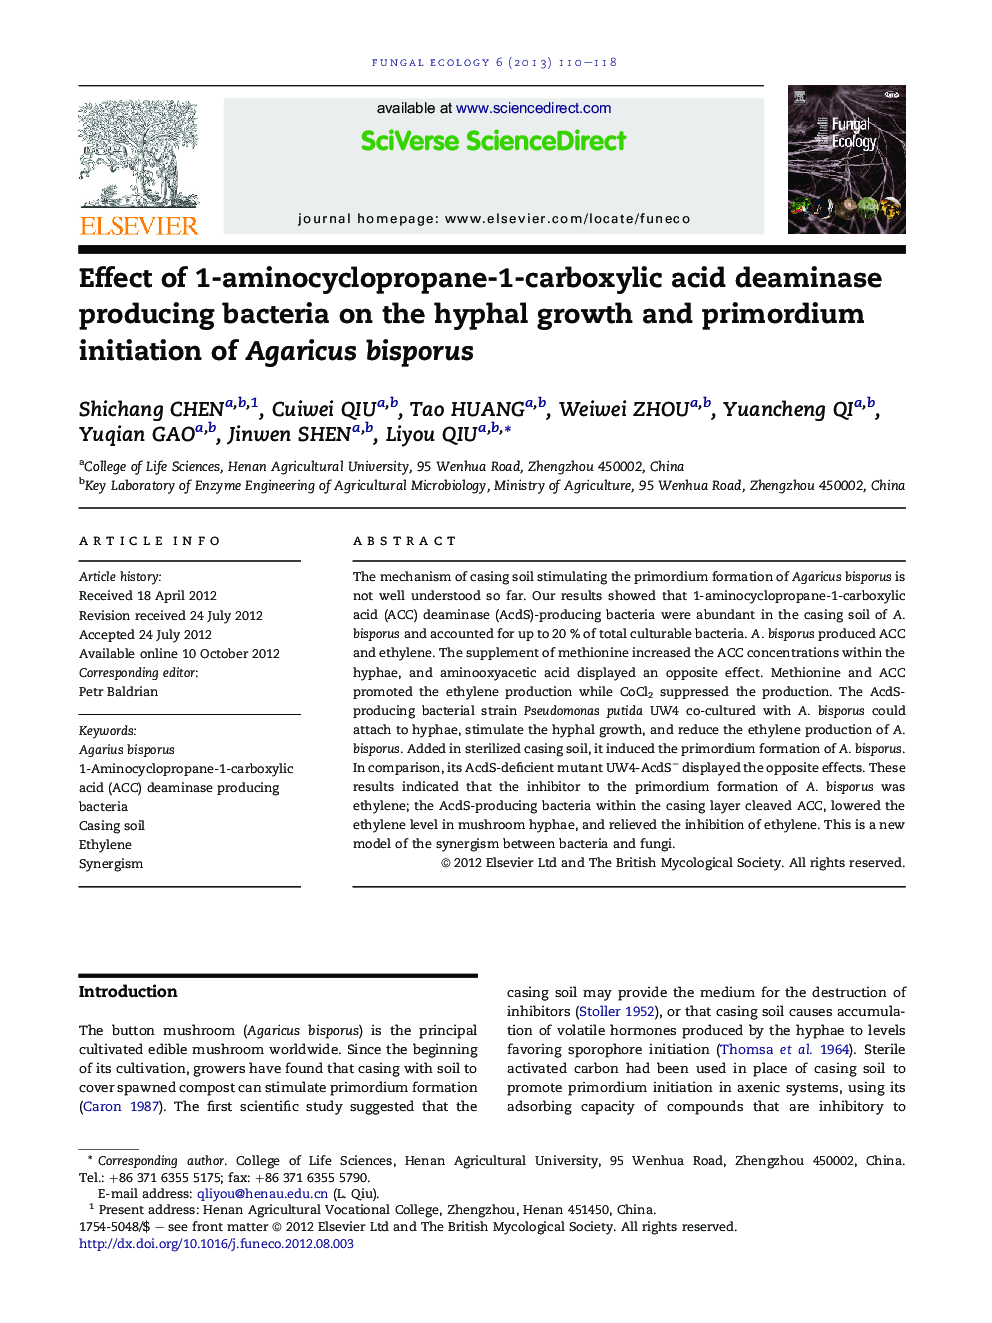 Effect of 1-aminocyclopropane-1-carboxylic acid deaminase producing bacteria on the hyphal growth and primordium initiation of Agaricus bisporus